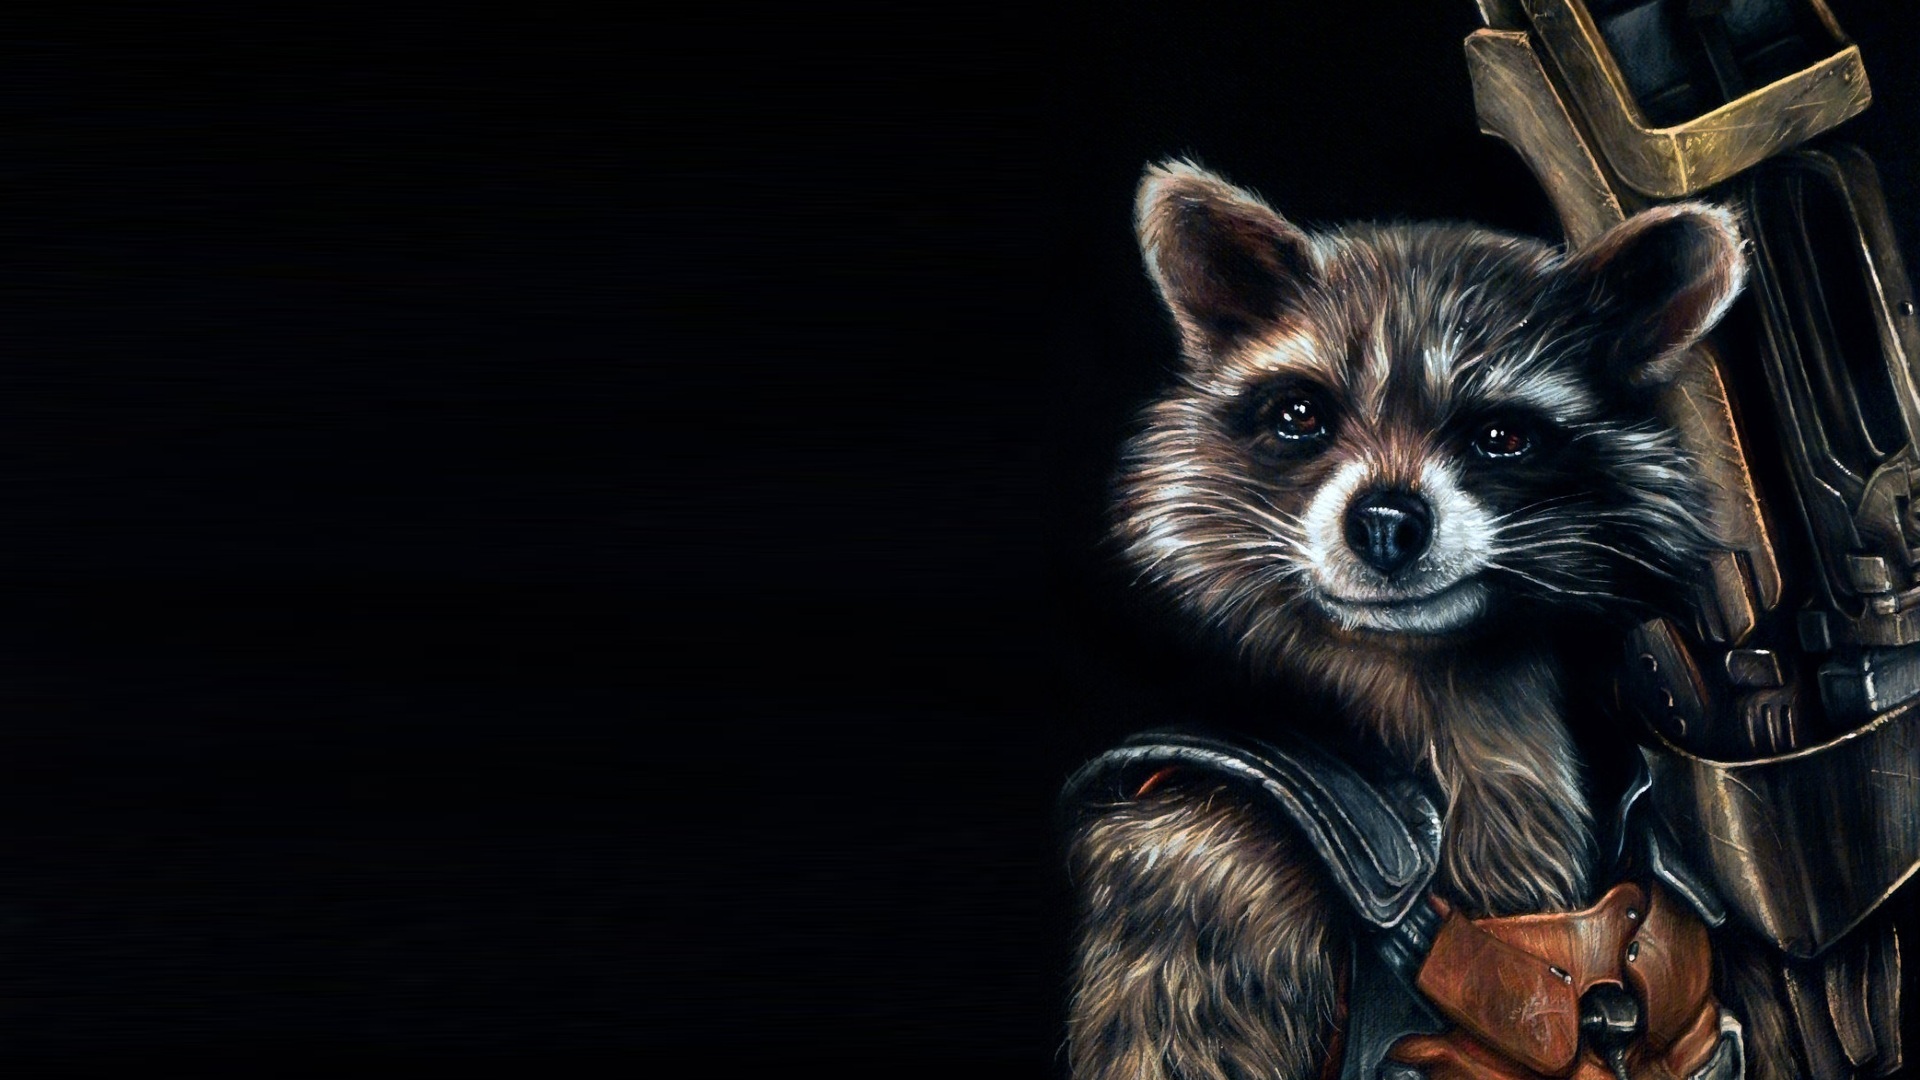 Top Rated HD Quality Rocket Raccoon Image Cool Collection